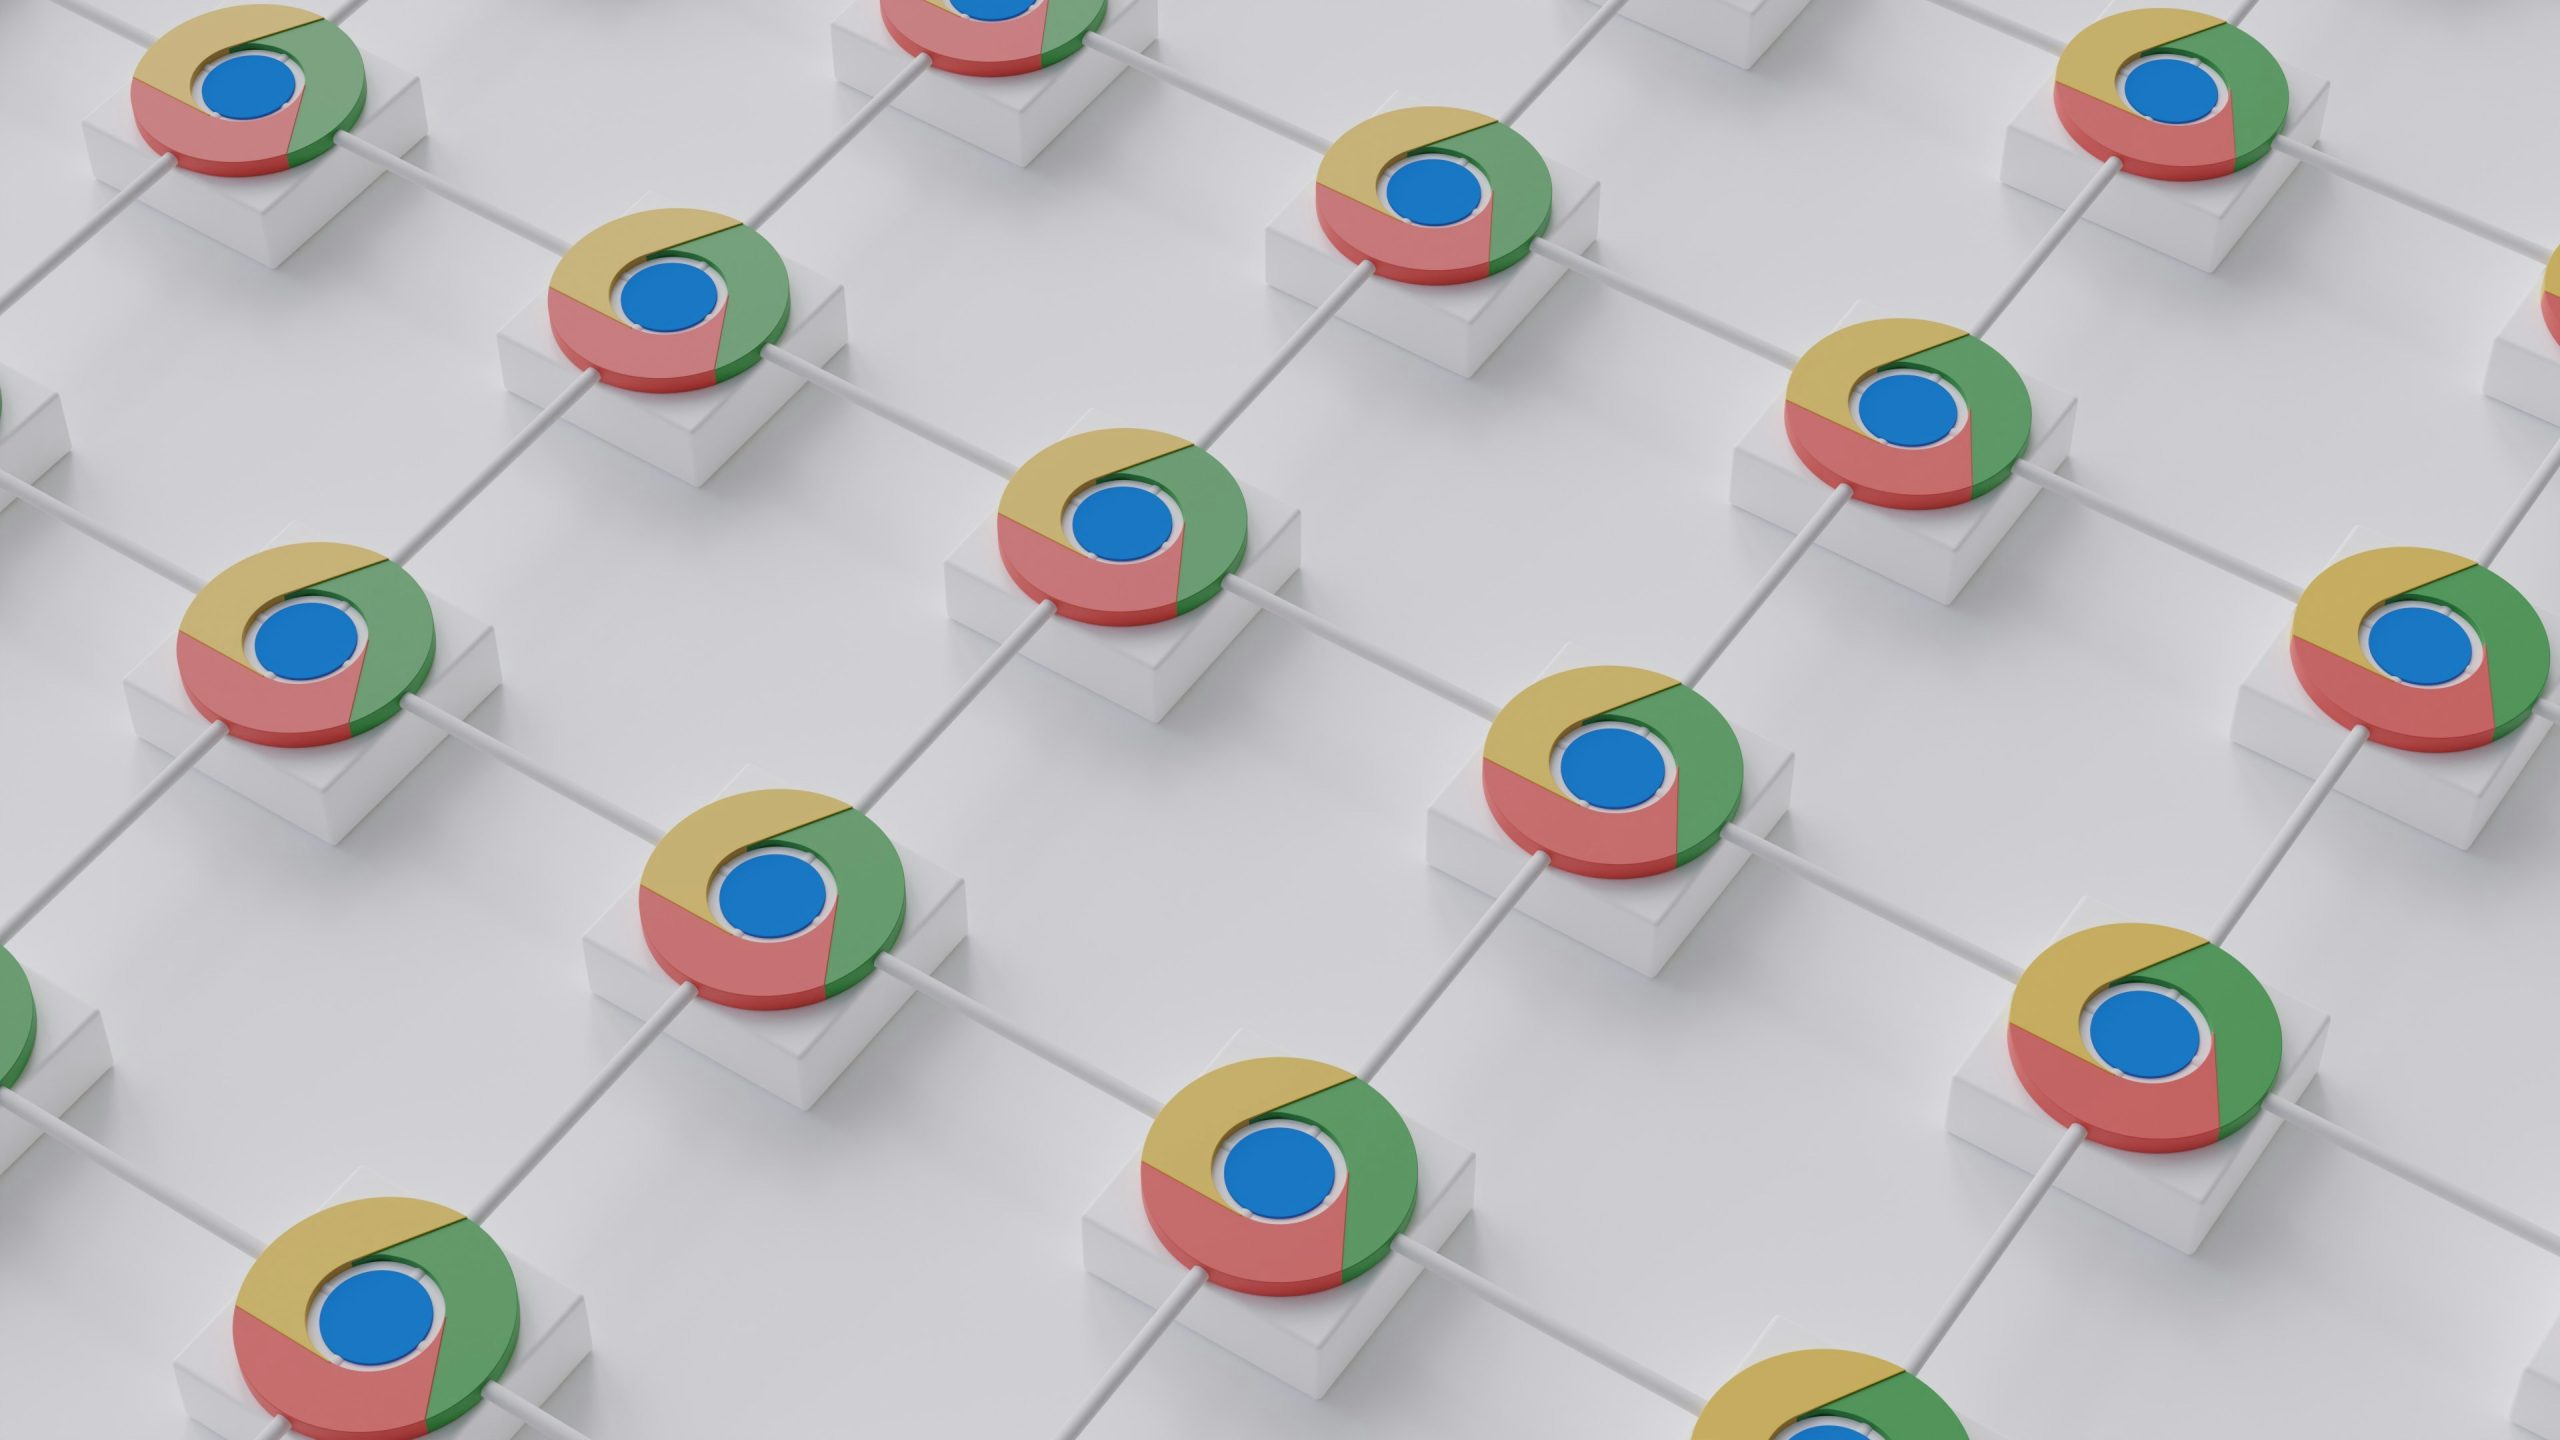 Google Chrome 121: New version of browser has AI features